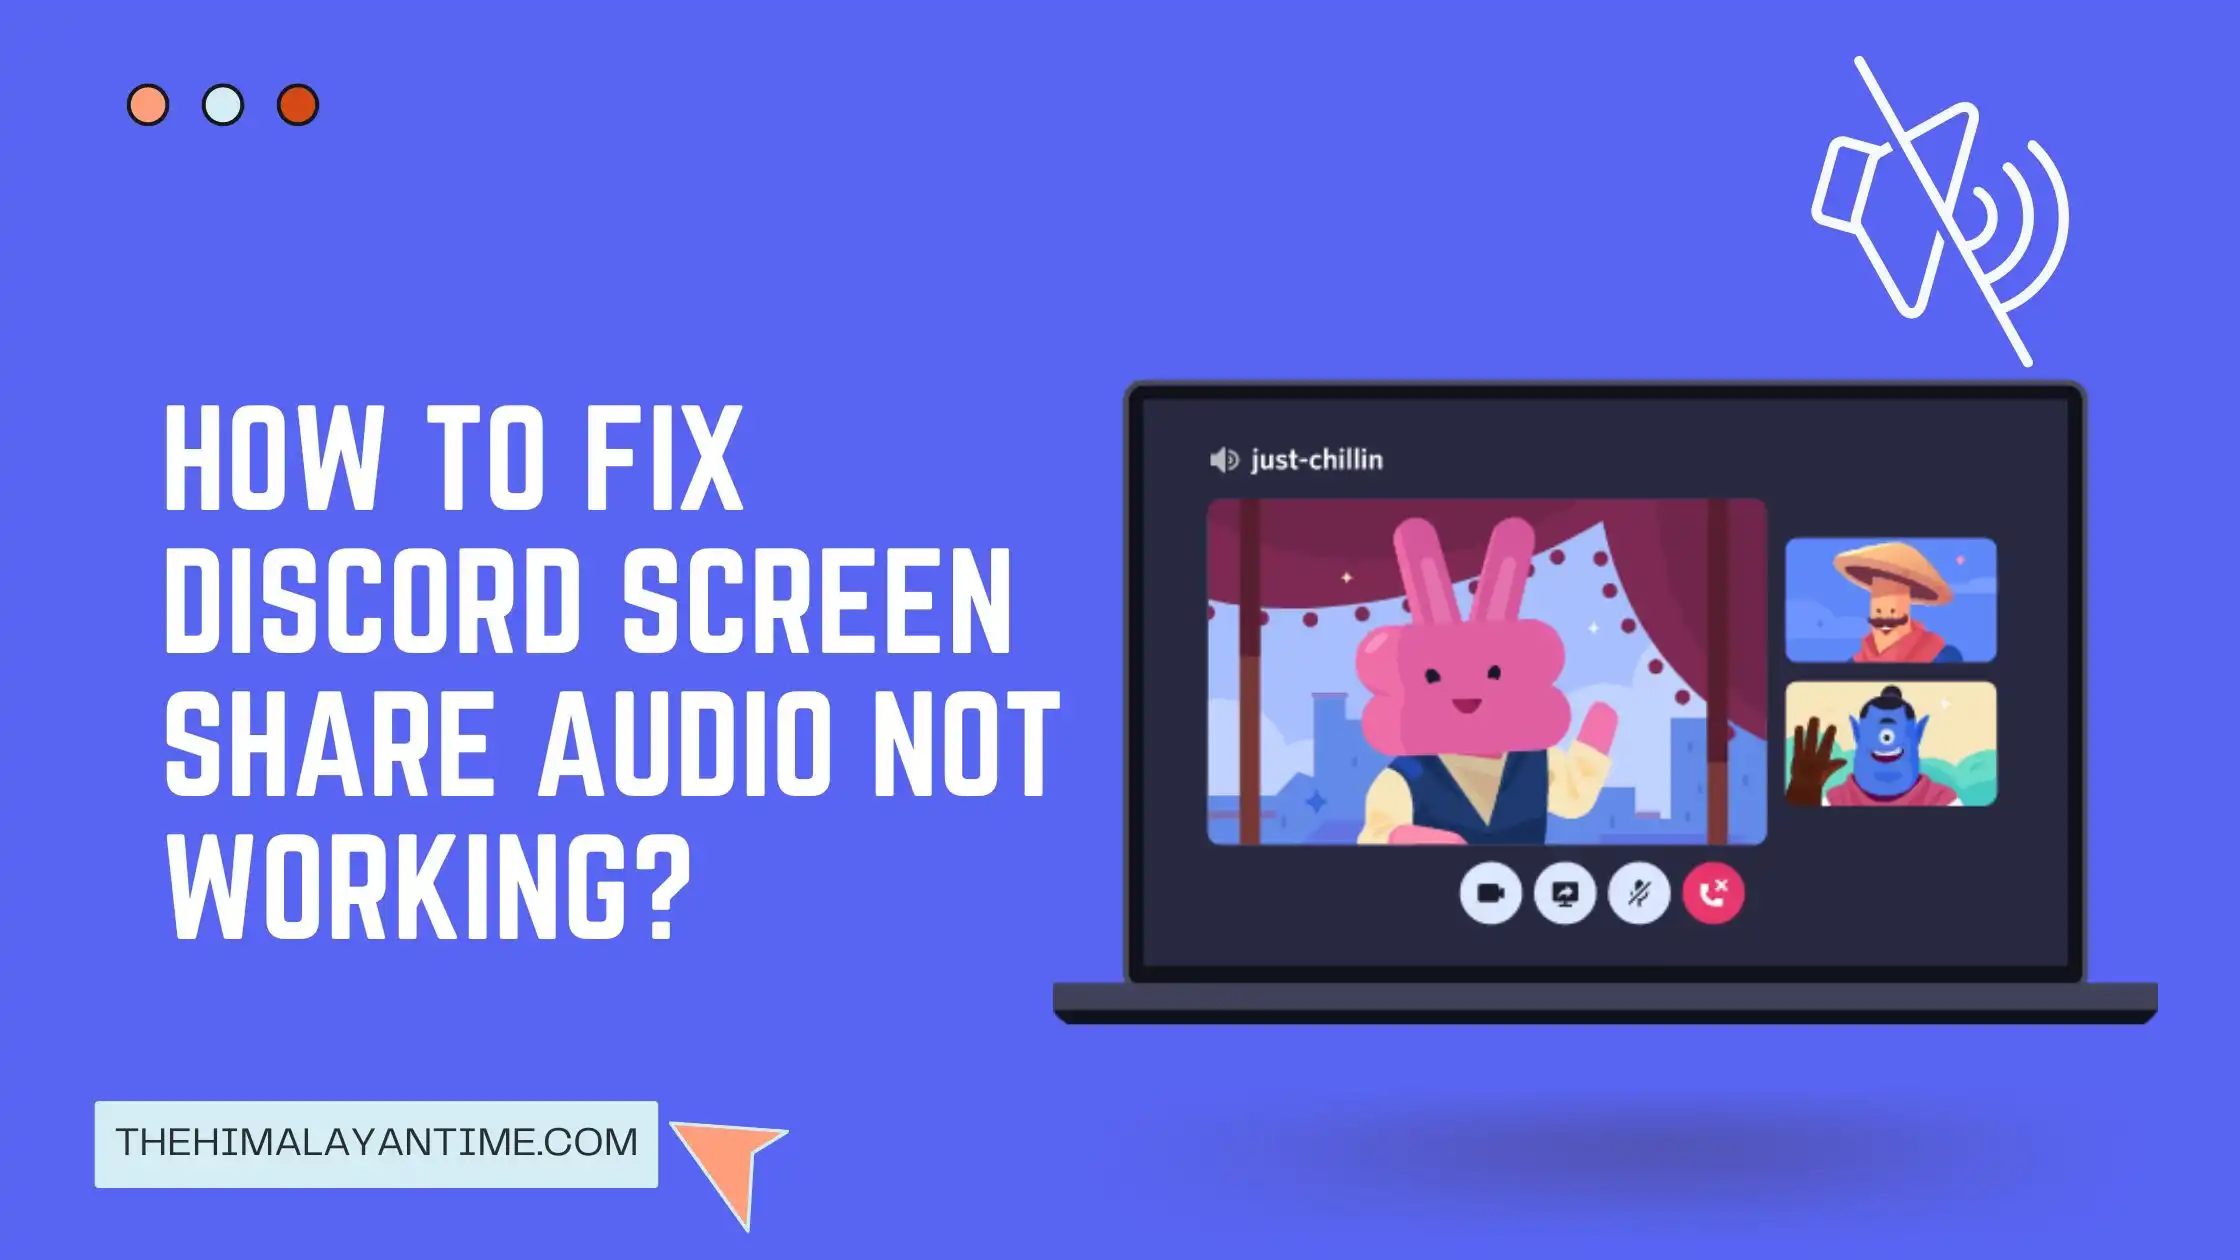 How To Fix Discord Screen Share Audio Not Working?